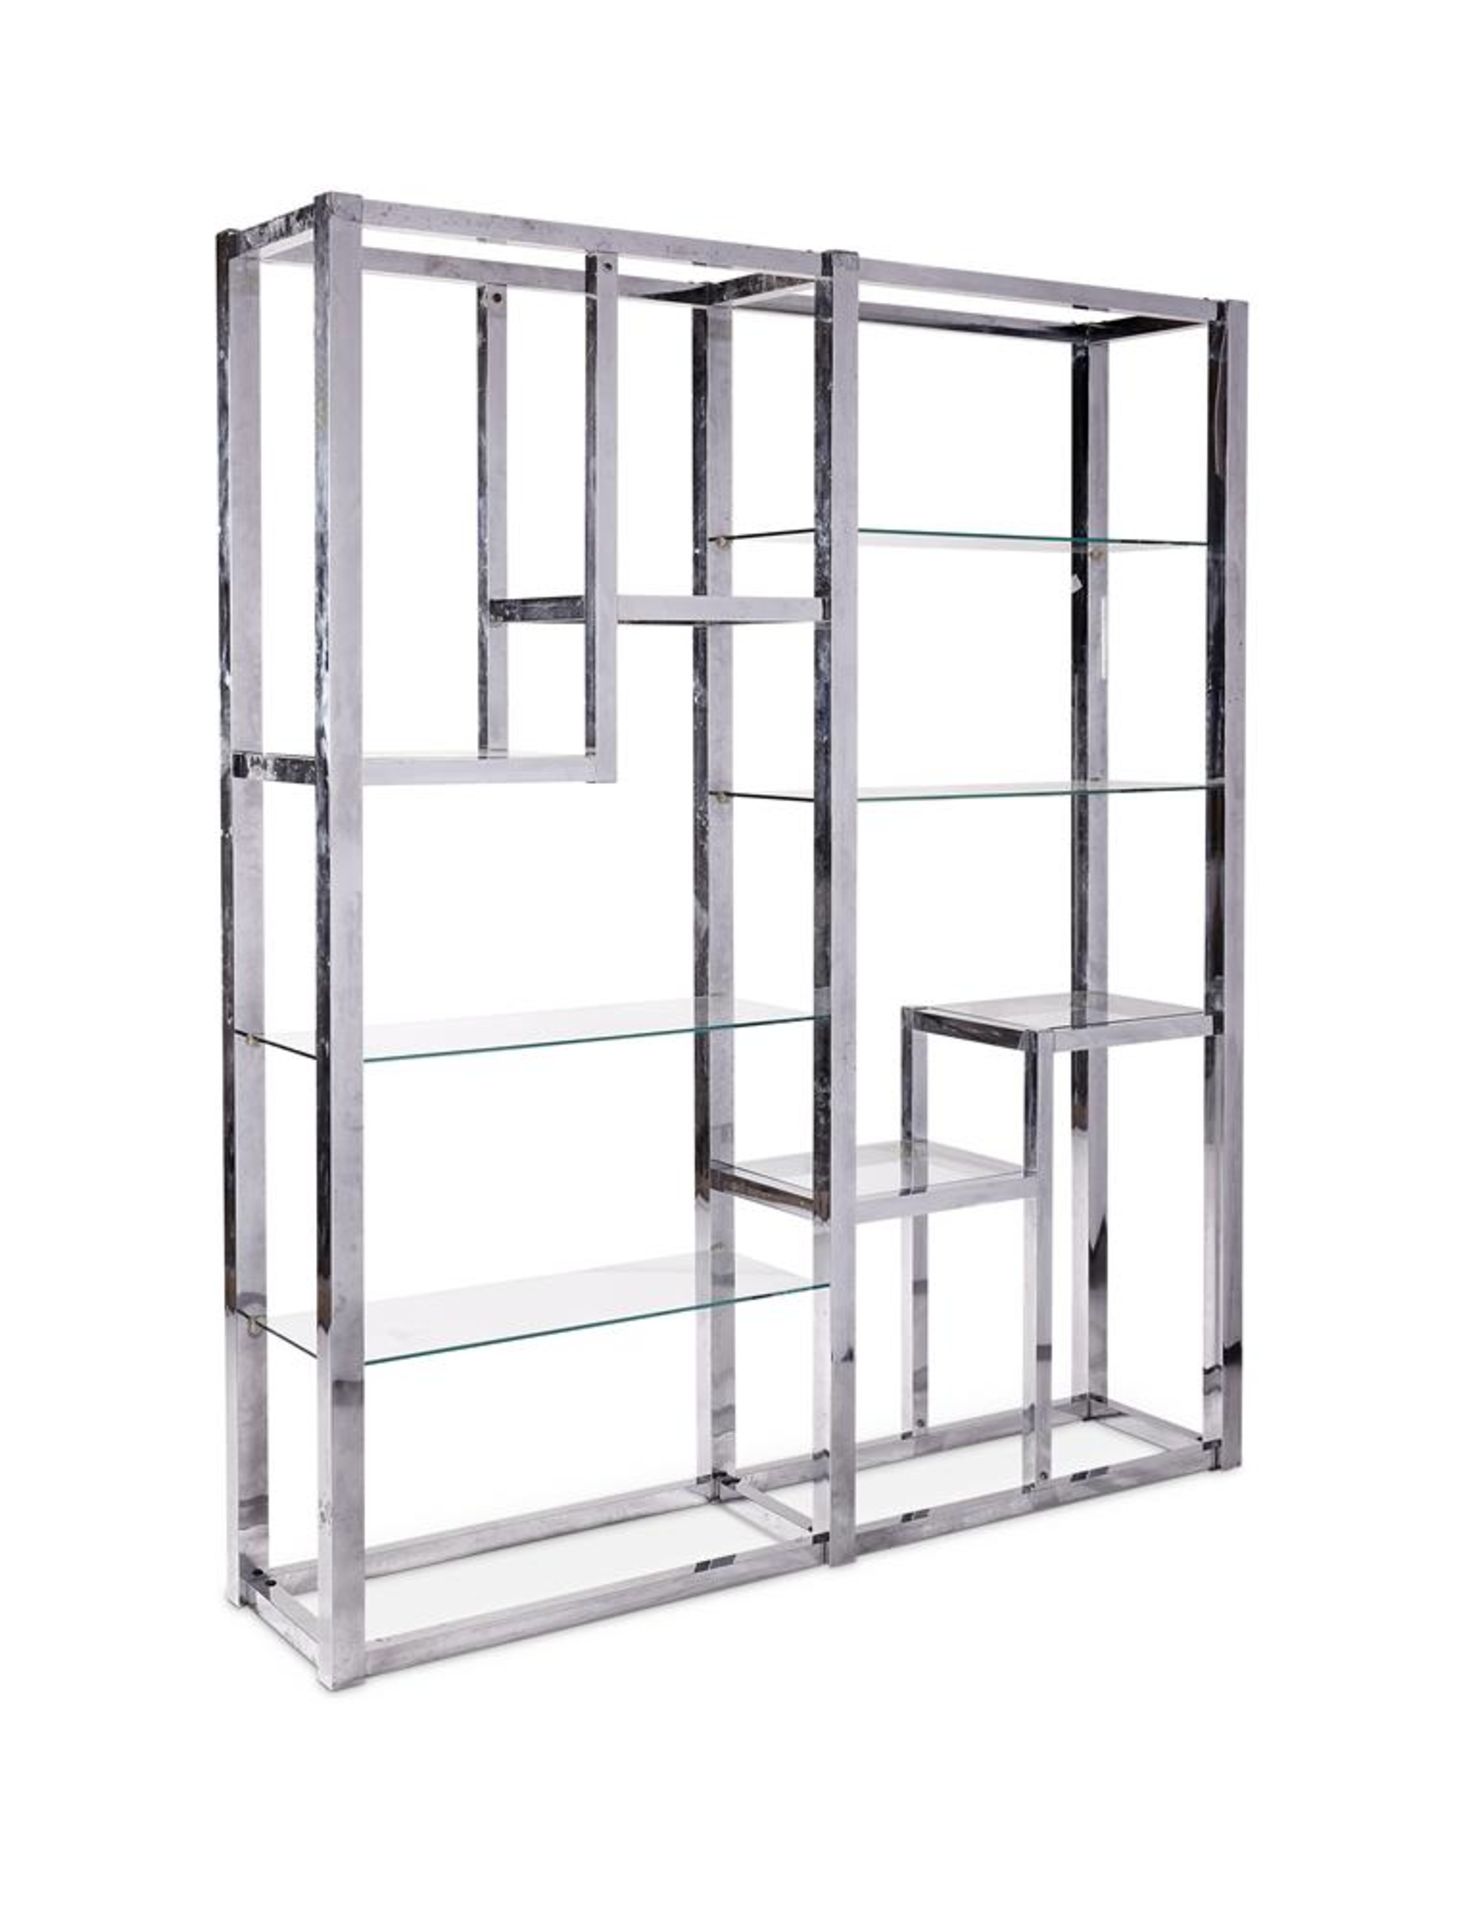 AN AMERICAN STEEL AND CHROME FRAMED ETAGERE, CIRCA 1970